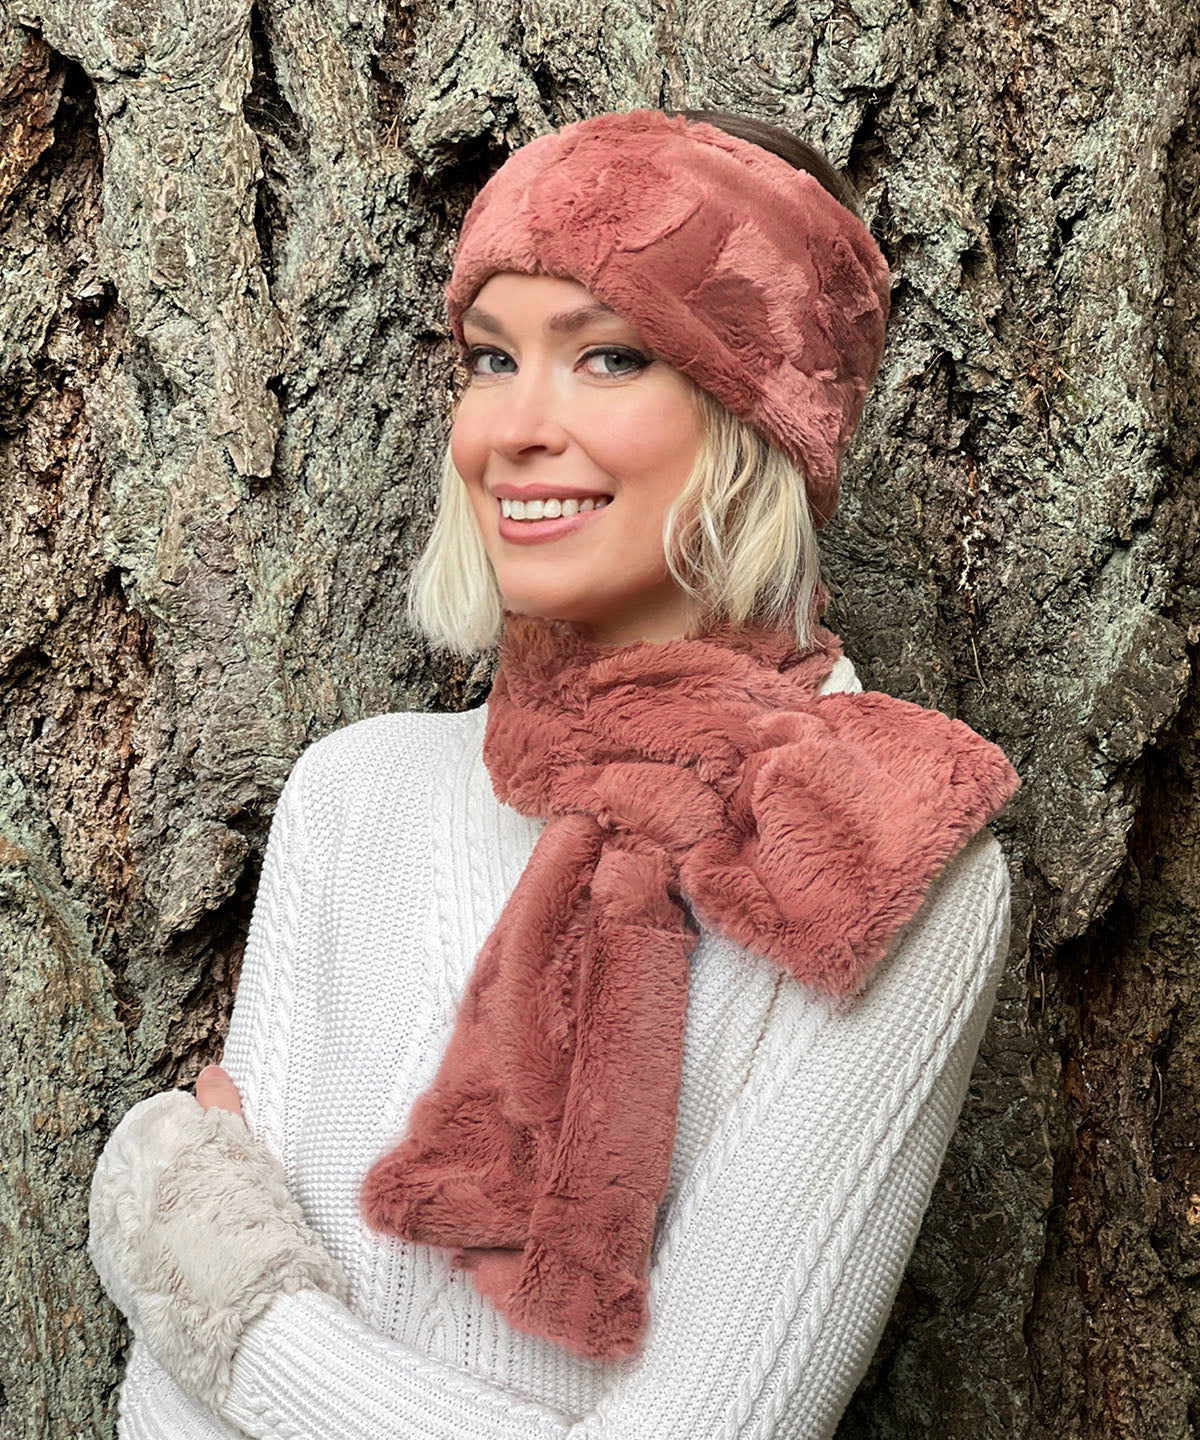 Pull Through Scarf Cuddly Faux Fur in Copper River Handmade in Seattle WA USA by Pandemonium Millinery